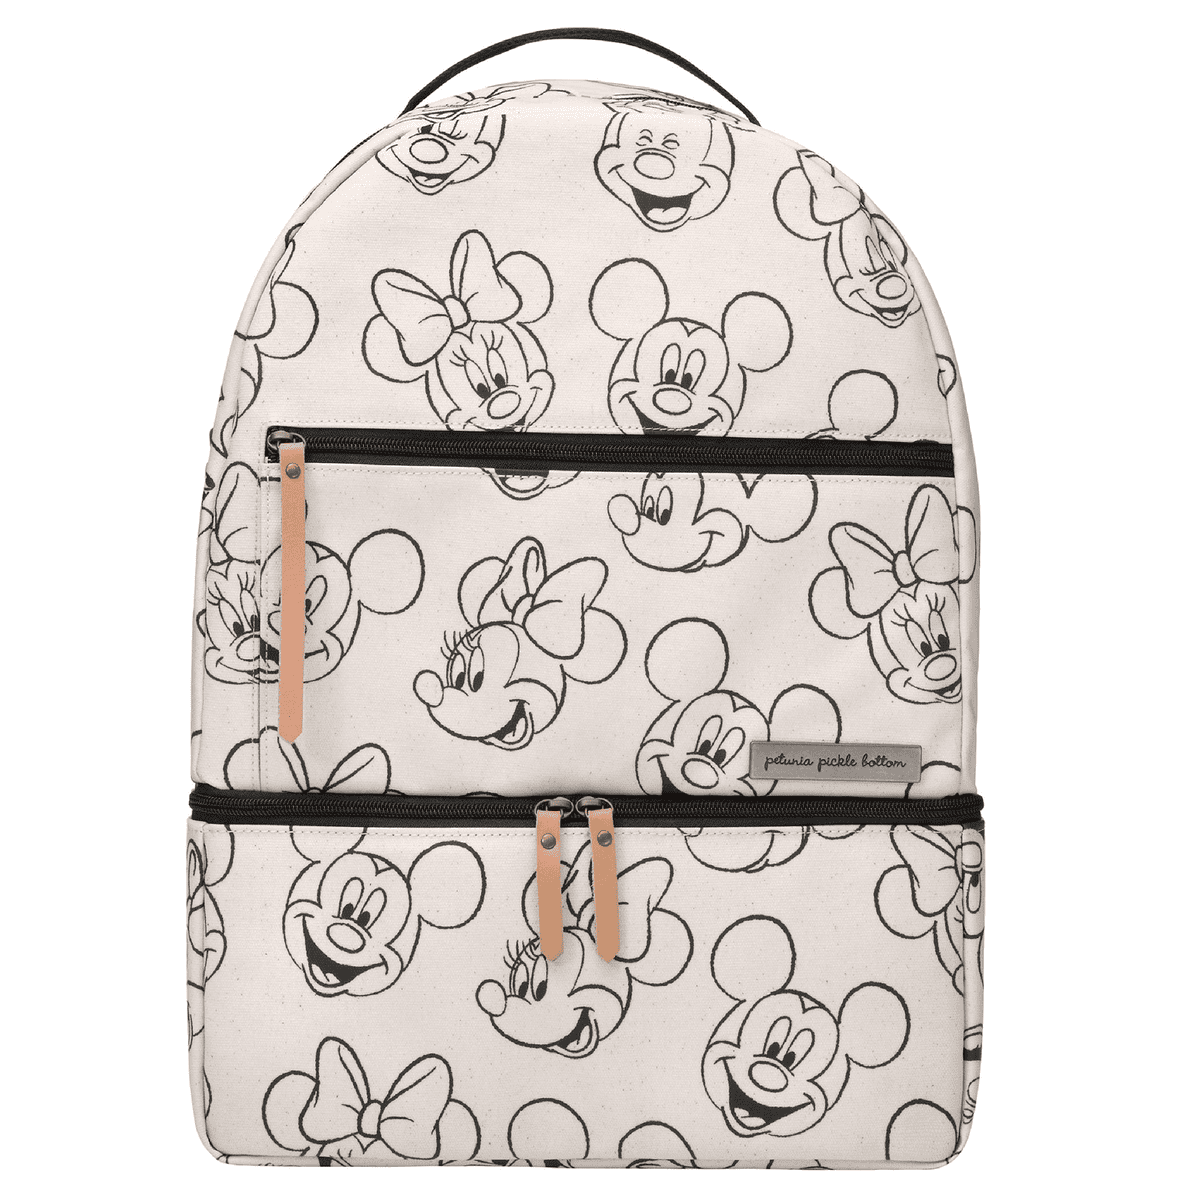 Mickey and Minnie Petunia Pickle bottom Backpack